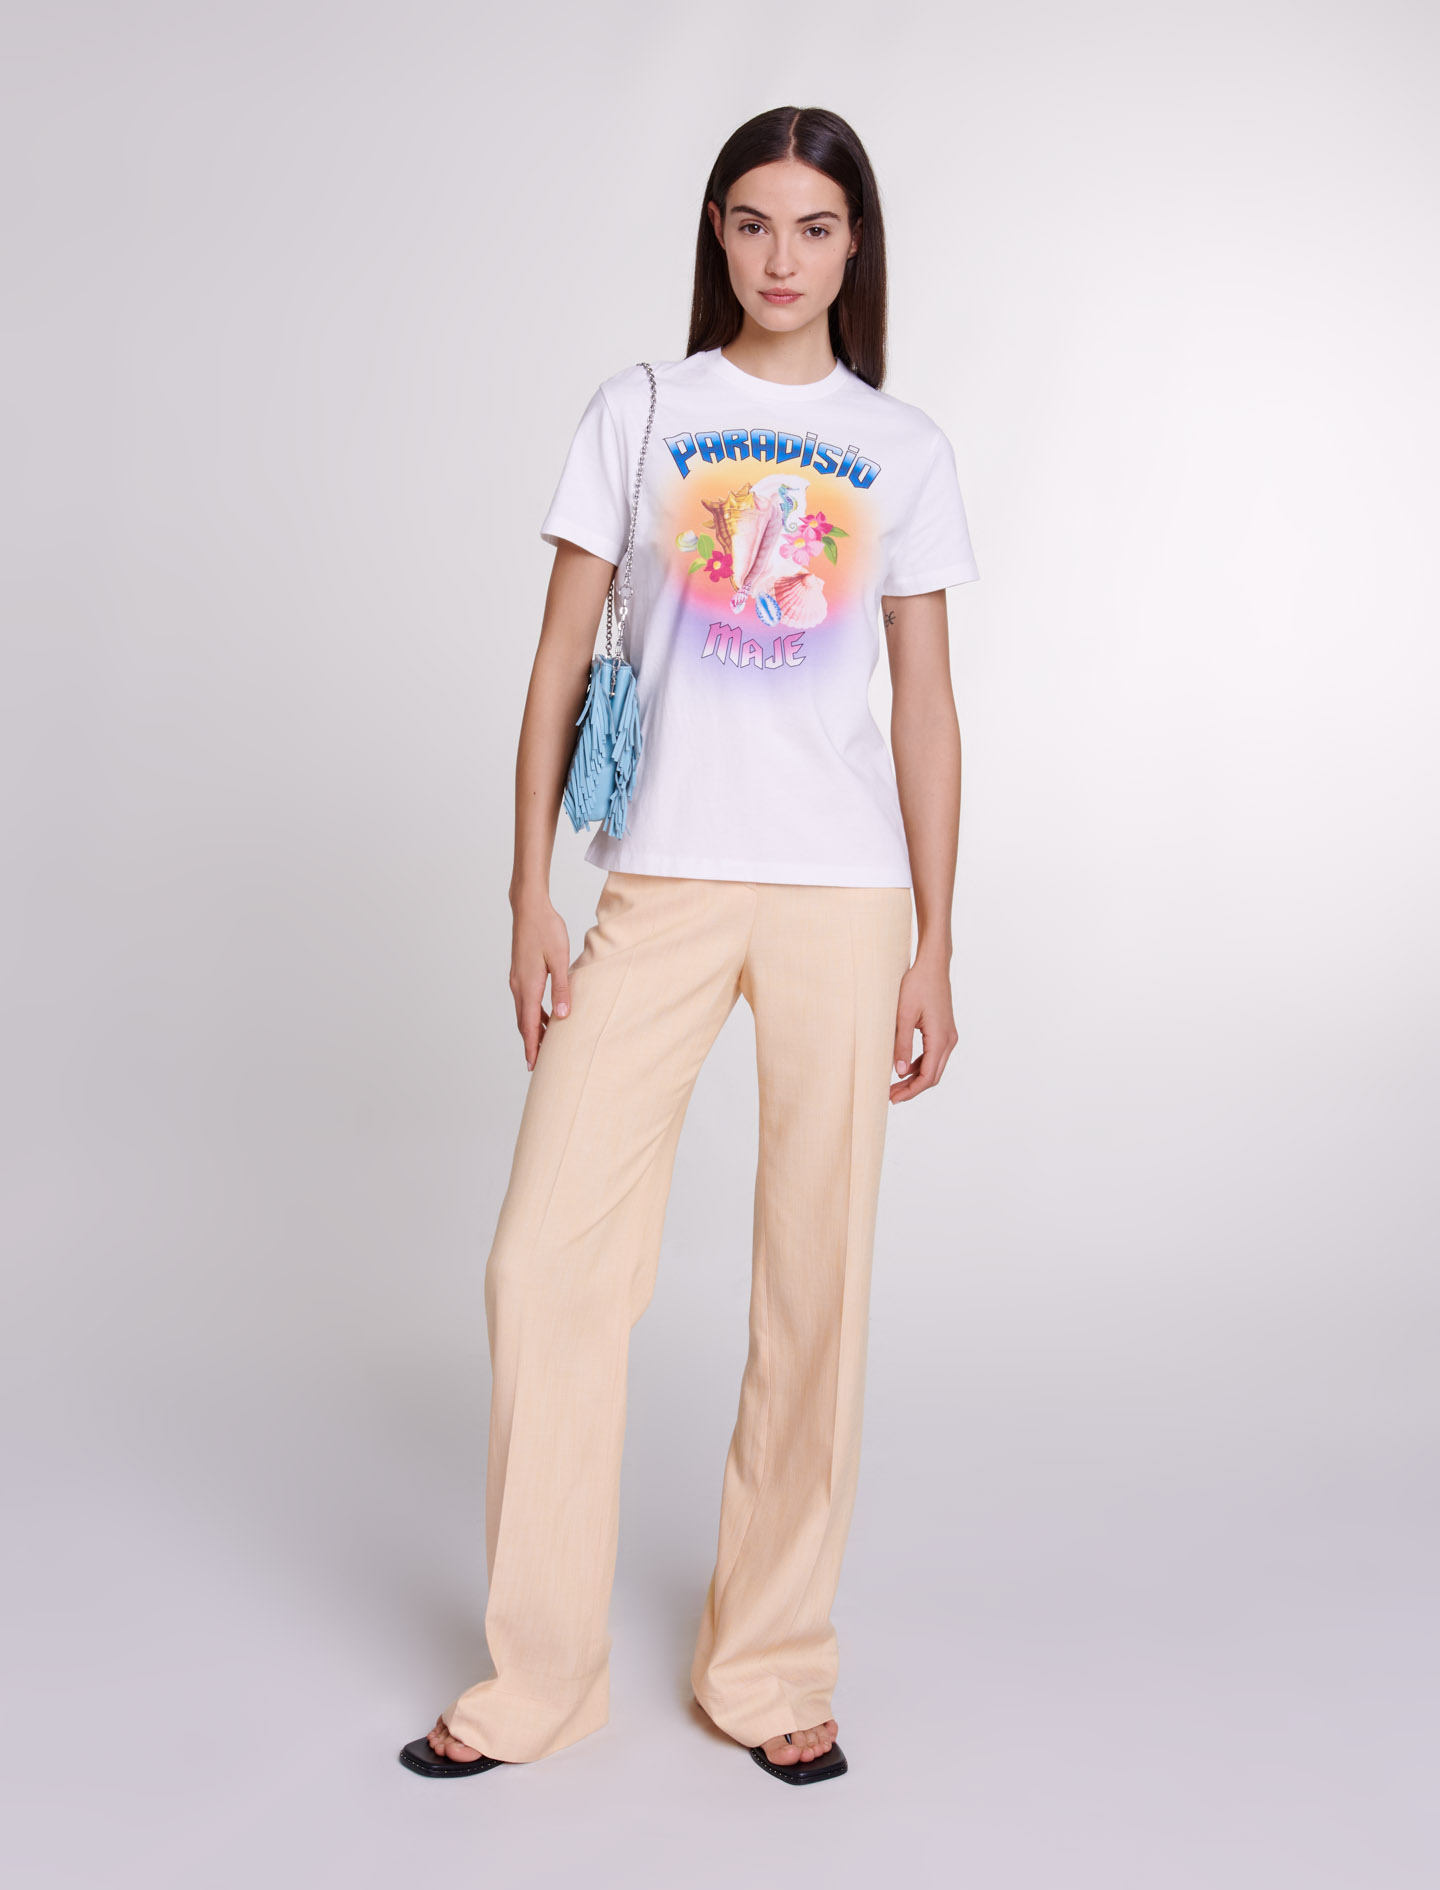 Mixte's cotton Rib: Paradisio printed t-shirt for Spring/Summer, size Mixte-Tops & Shirts-US L / FR 3, in color Ecru / Beige